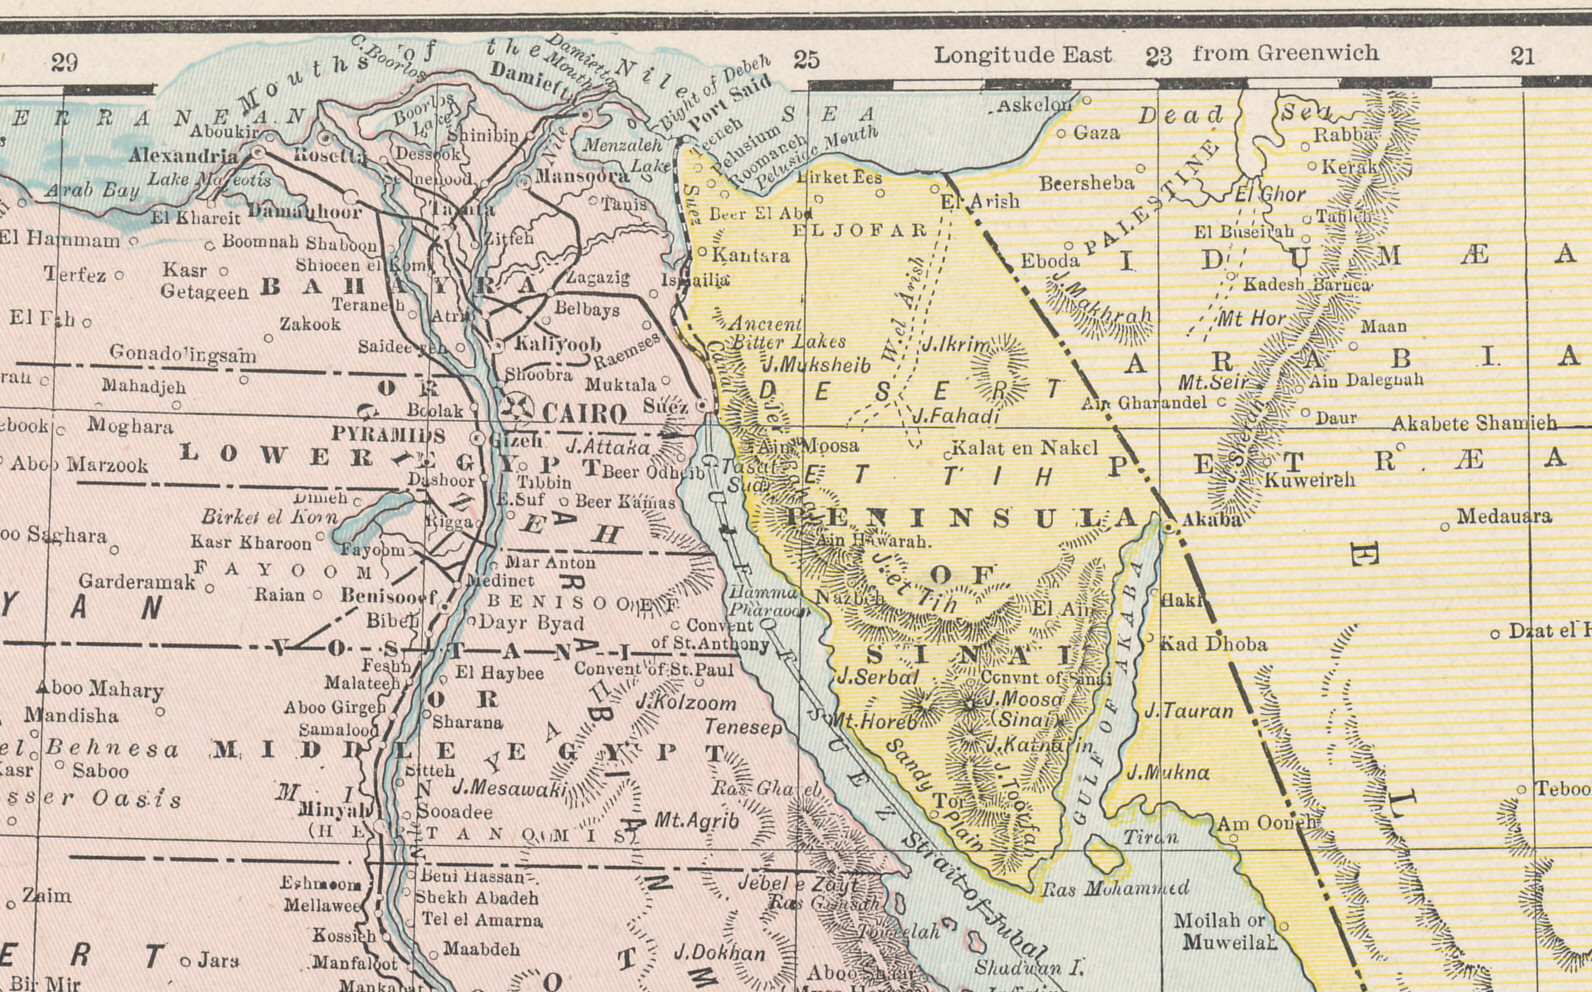 Northern Egypt, the Suez Canal, and Sinai from Cram's 1896 Railway Map of the Turkish Empire.